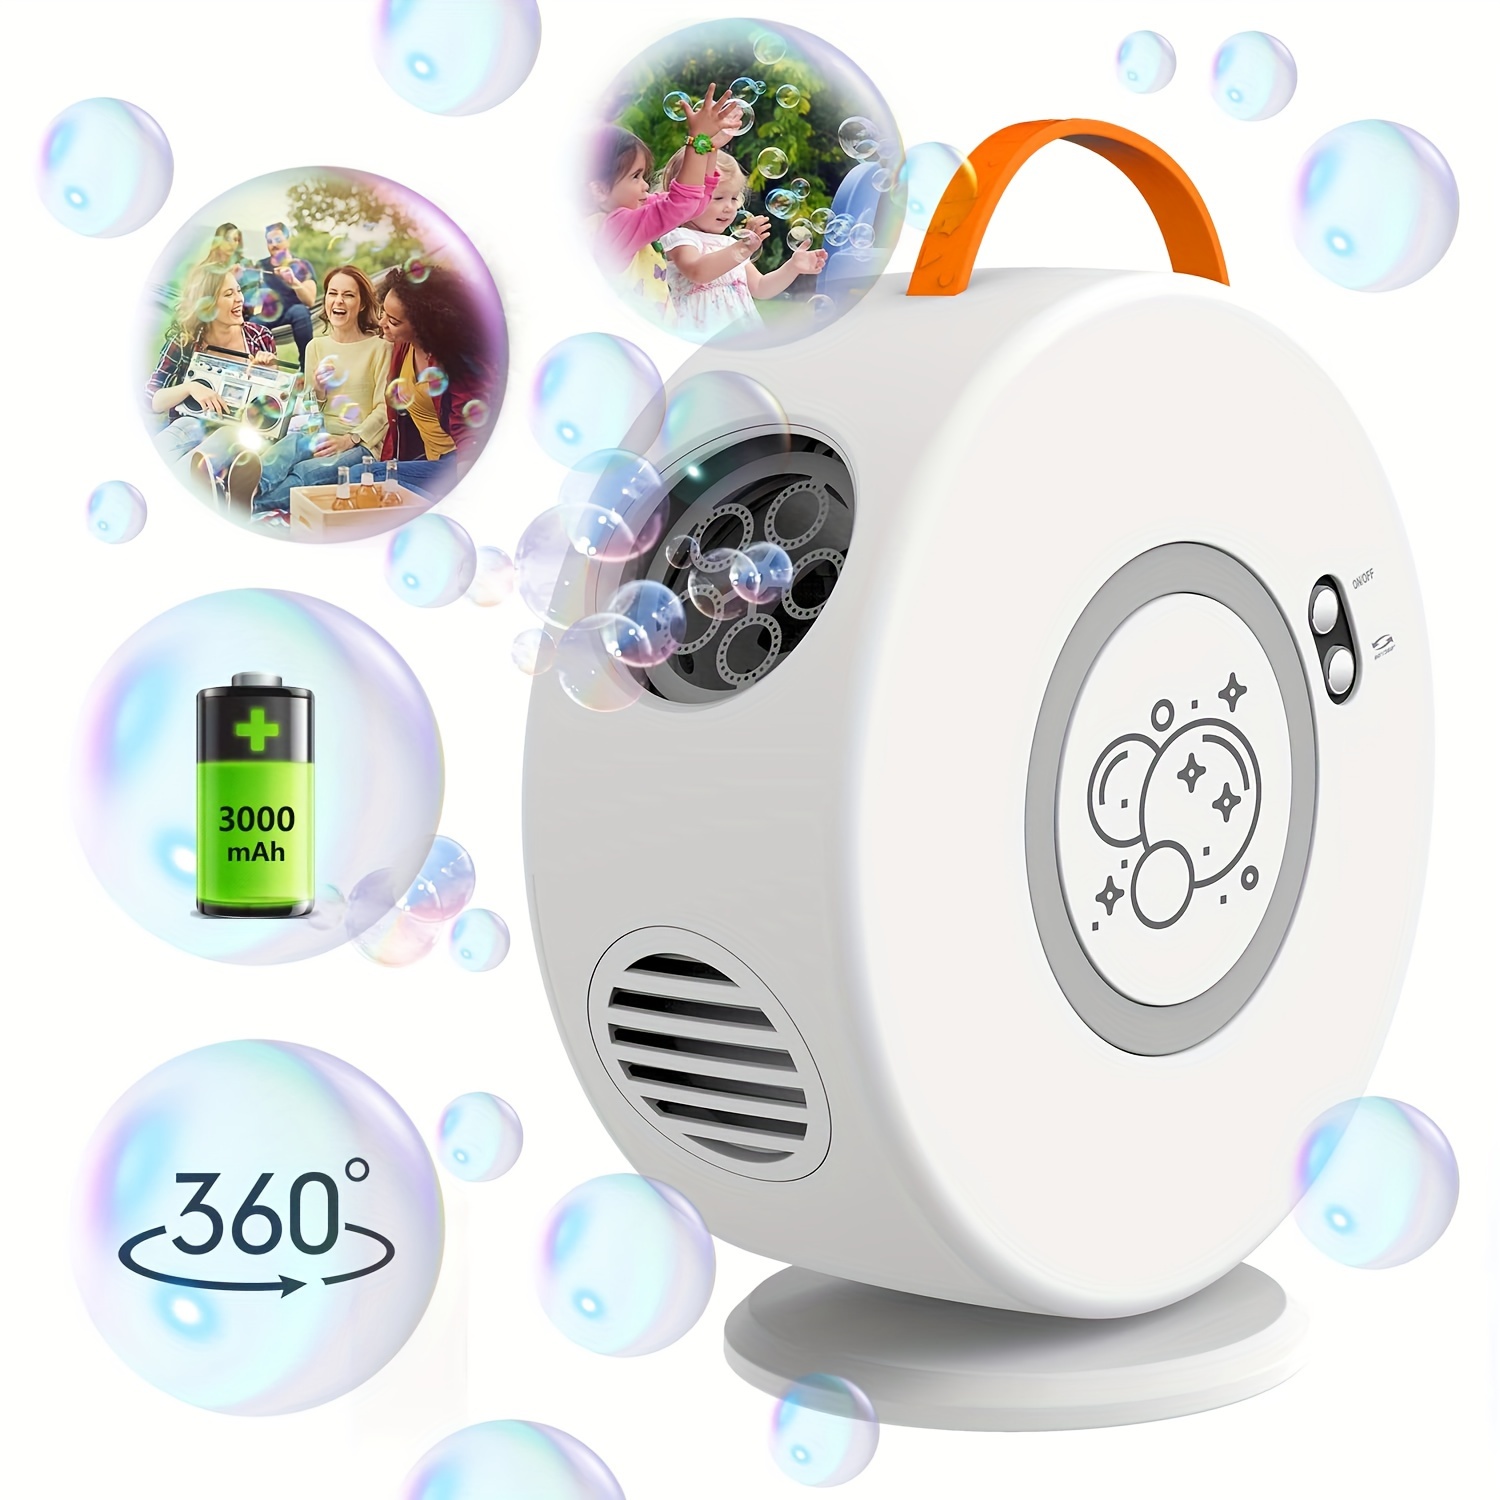 

Soap Bubble Machine, Bubble Maker Toy For Children, 90°/360° Rotatable, Portable Automatic Soap Bubble Machine With 500 Ml, Outdoor Indoor Toy Games Gift From 3 Years And Up